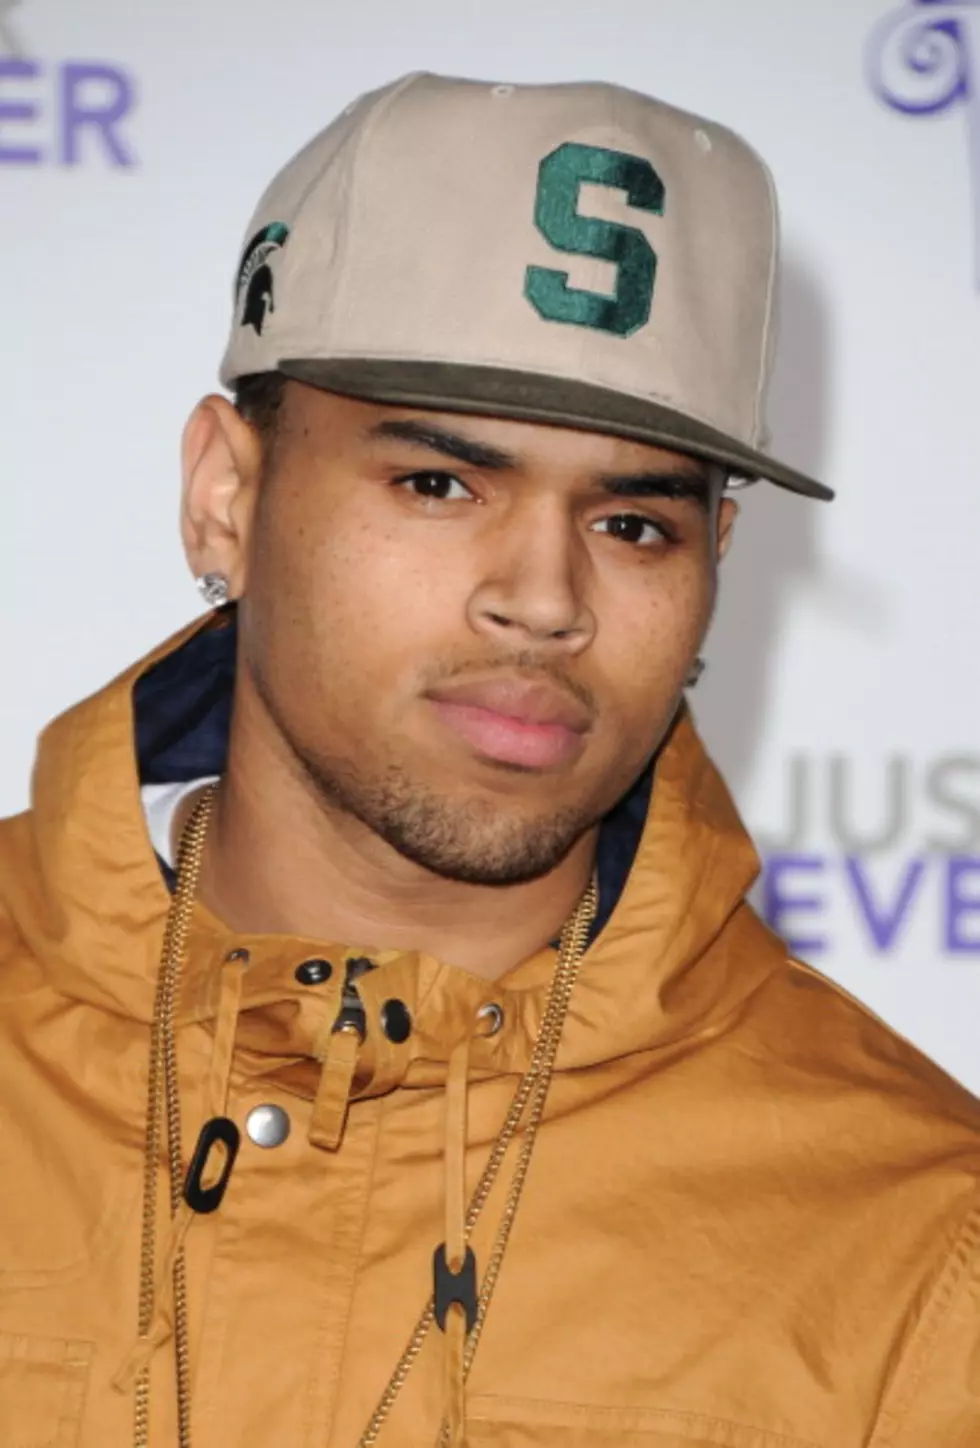 Angry Chris Brown Enraged On The Set Of GMA, Breaks Window and Storms Out!